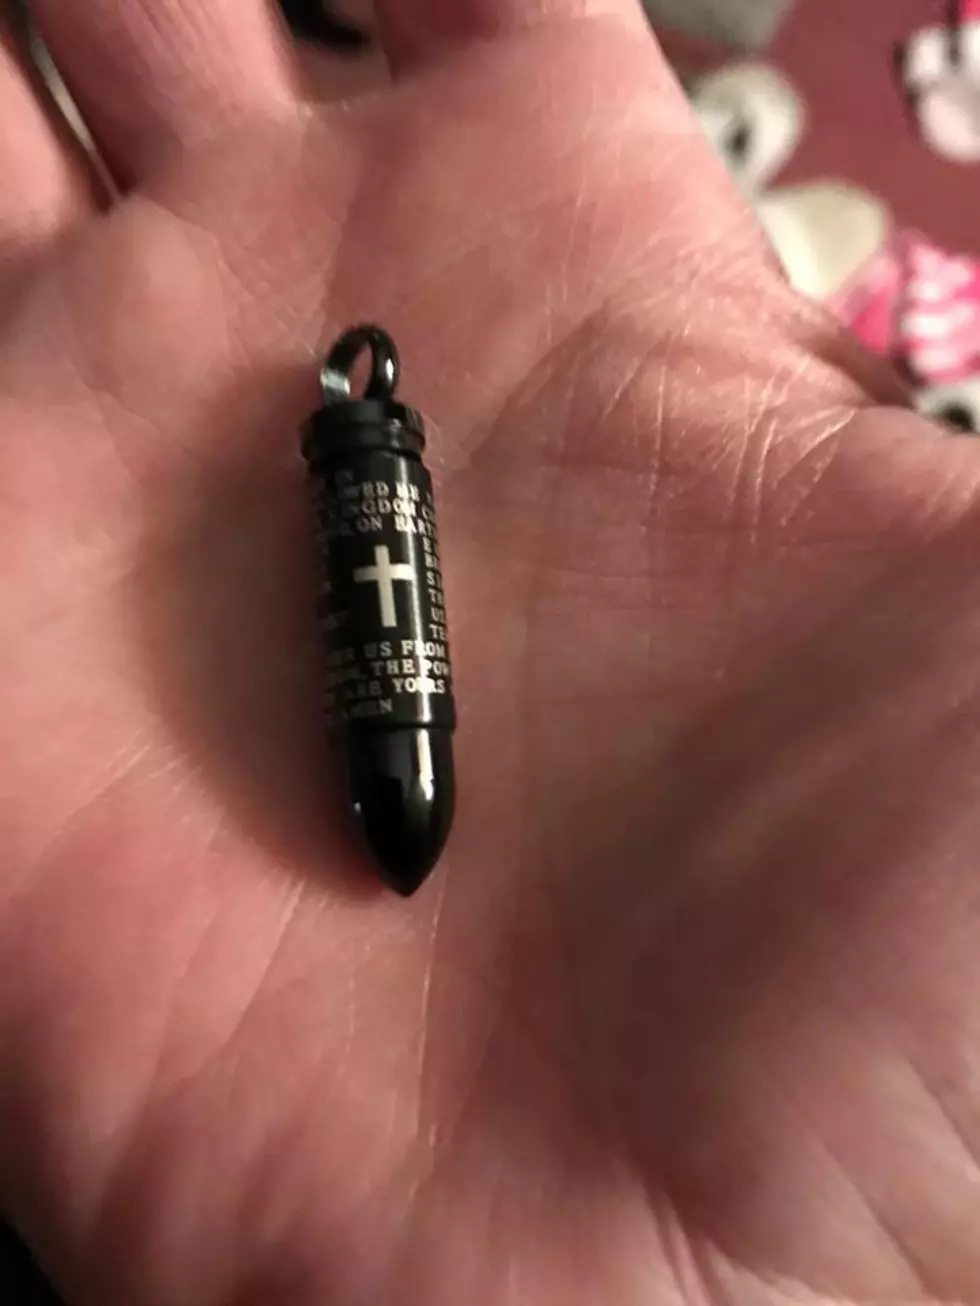 Help Find the Owner of This Pendent Found in Ellenville